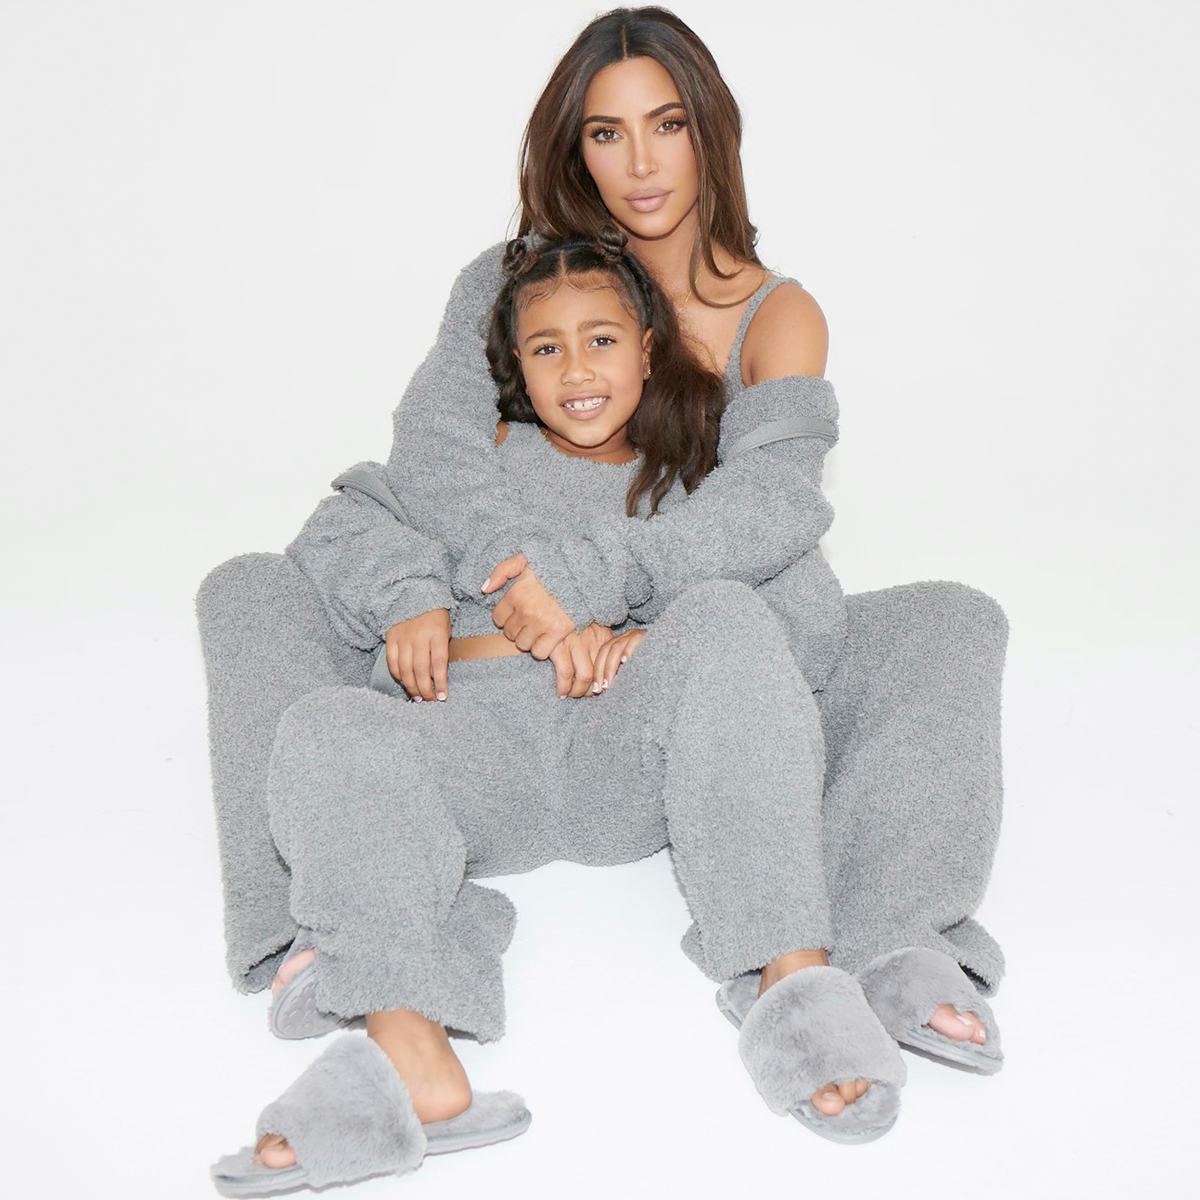 SKIMS - Designed for comfort and style, Kim Kardashian West wears